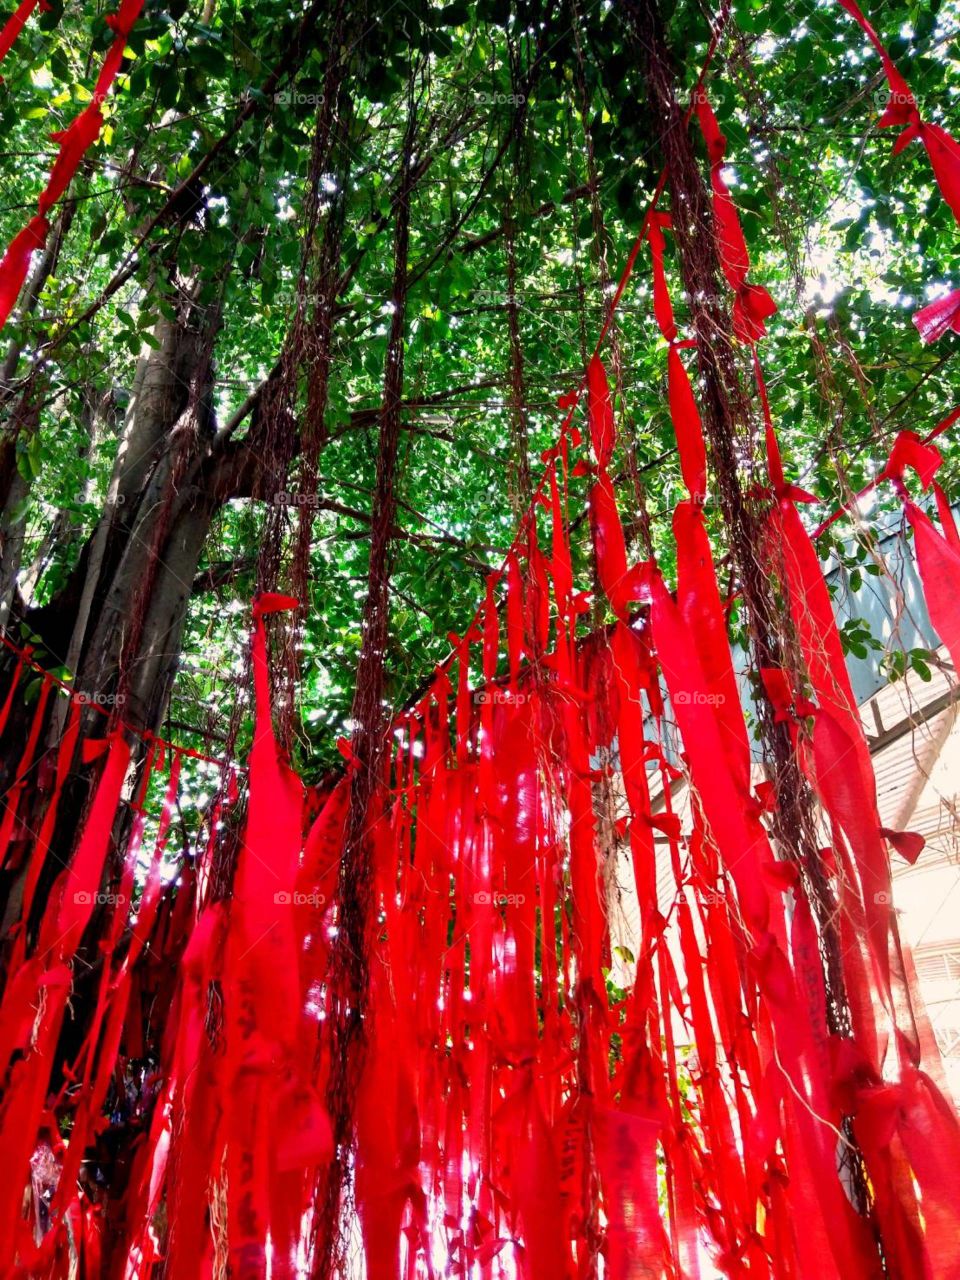 Red ribbons Tree in Thailand.